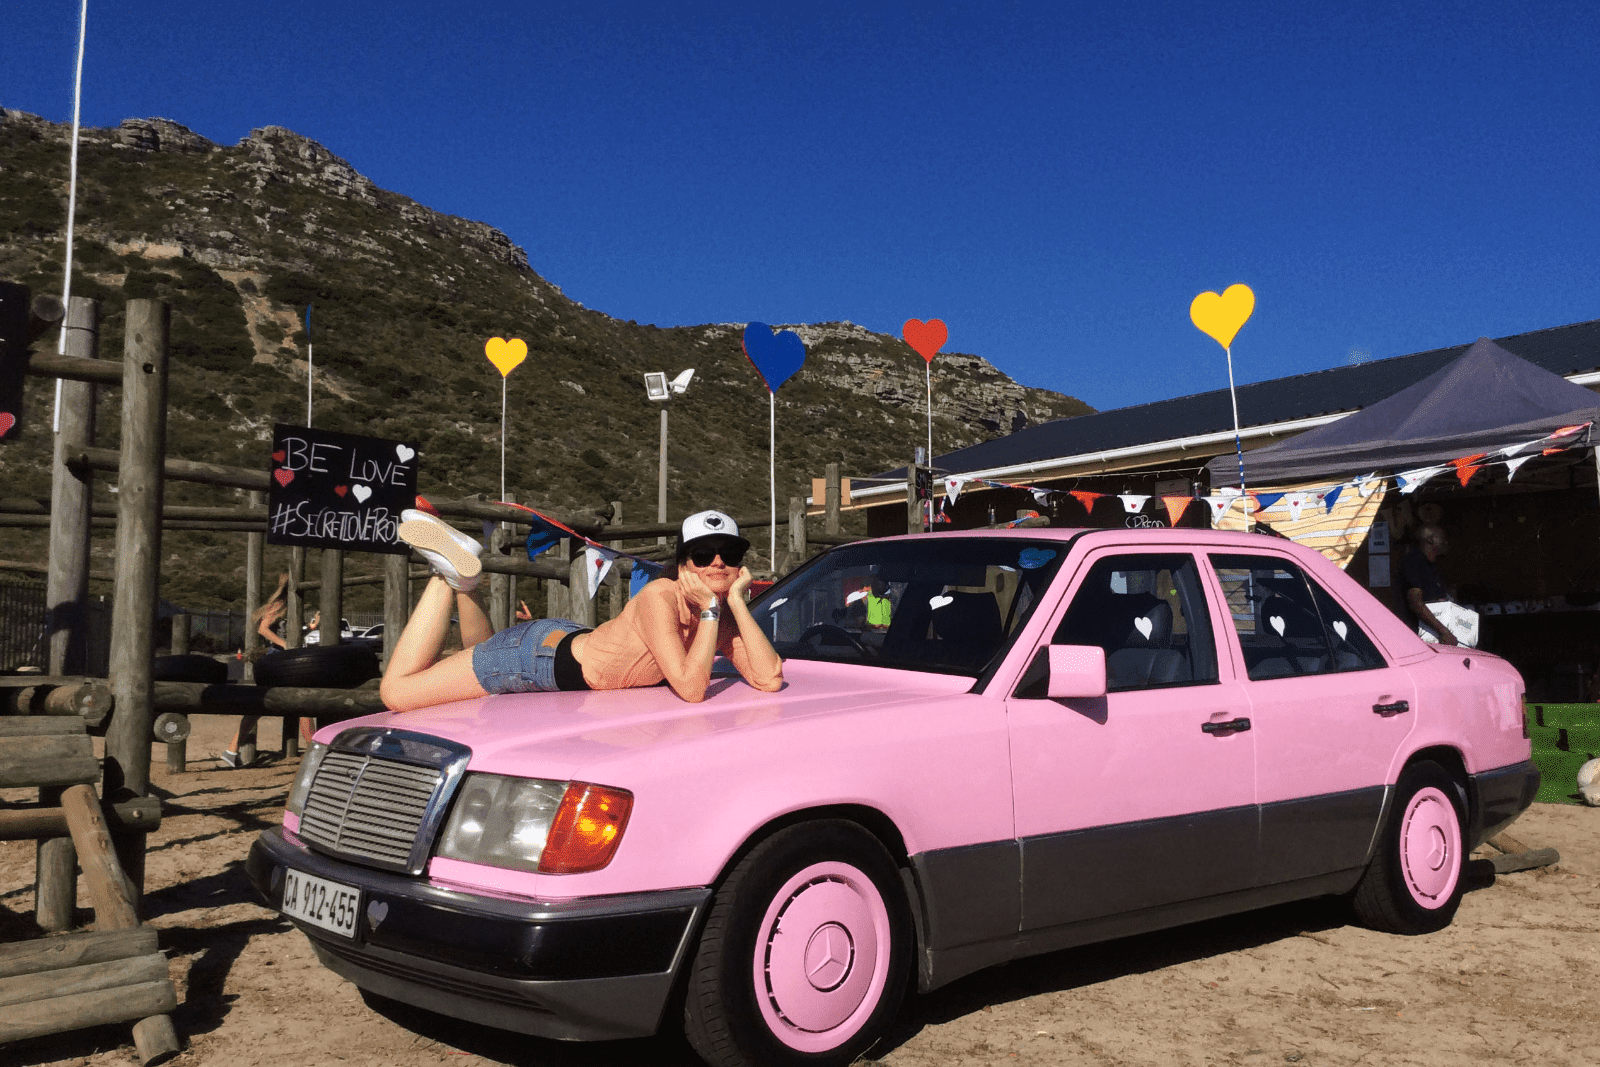 The signature pink car that The Secret Love Project used at events